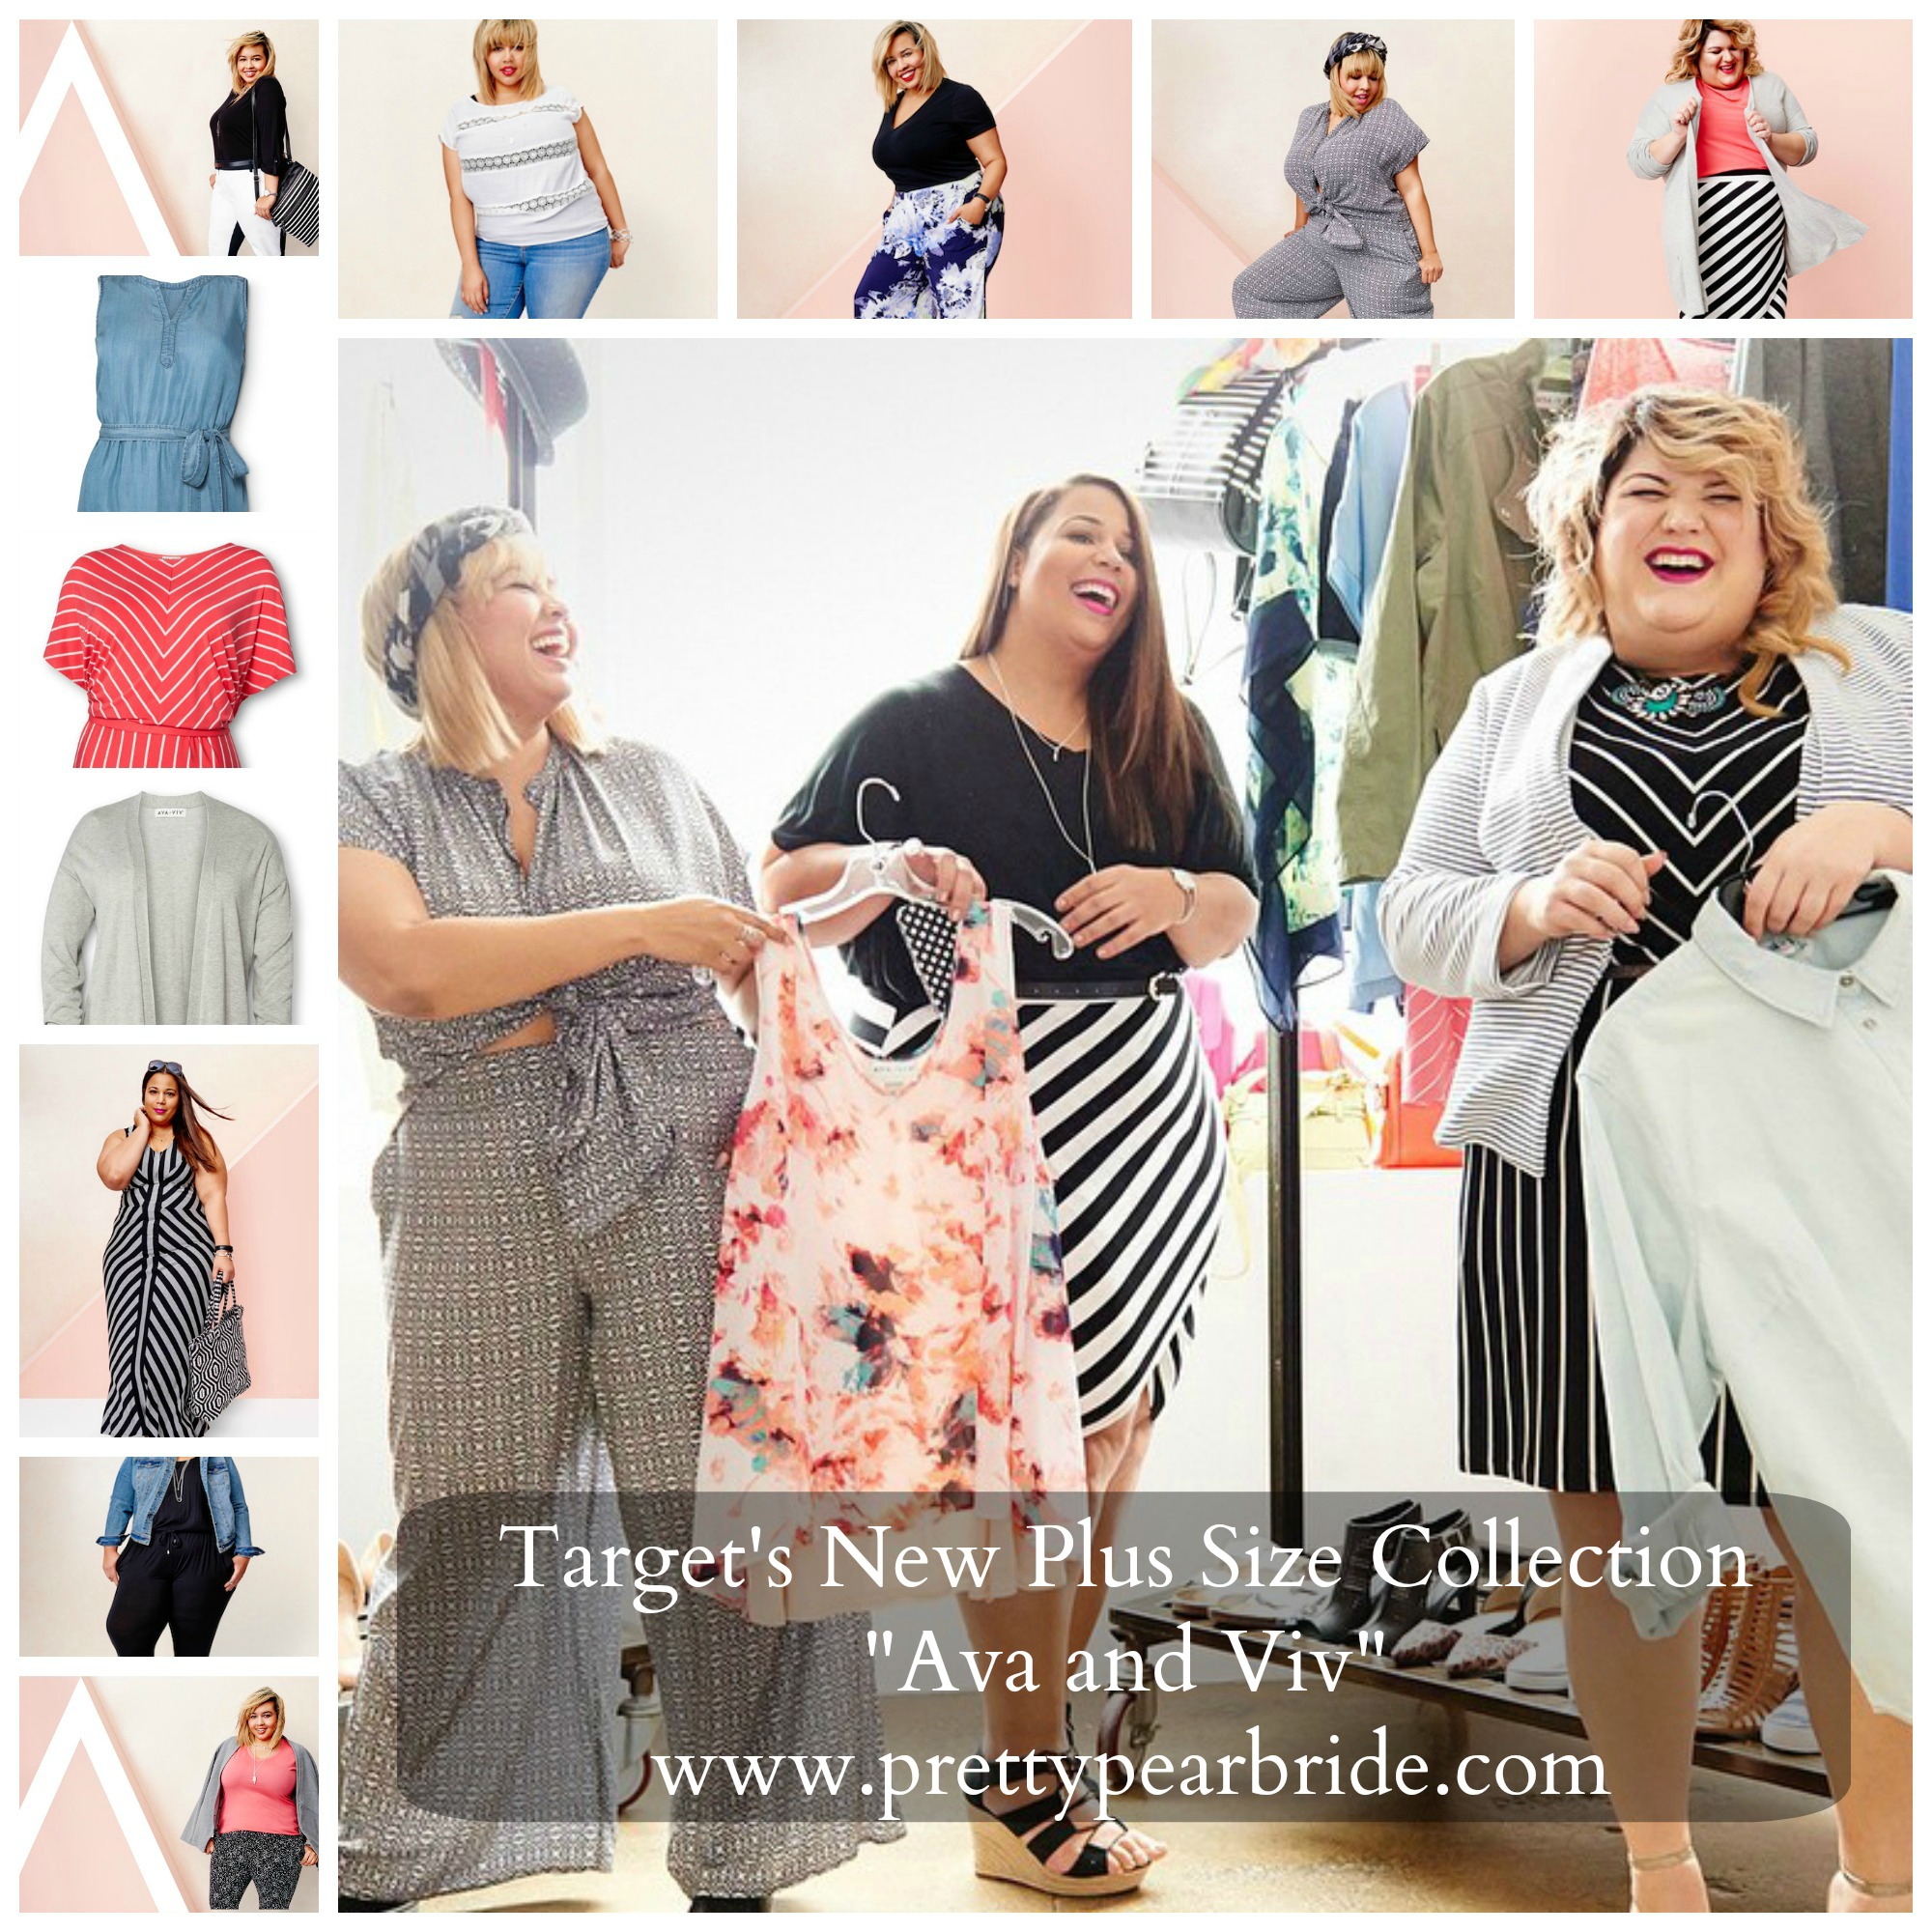 TOP PICKS FROM TARGET’S NEW PLUS-SIZE COLLECTION, AVA & VIV